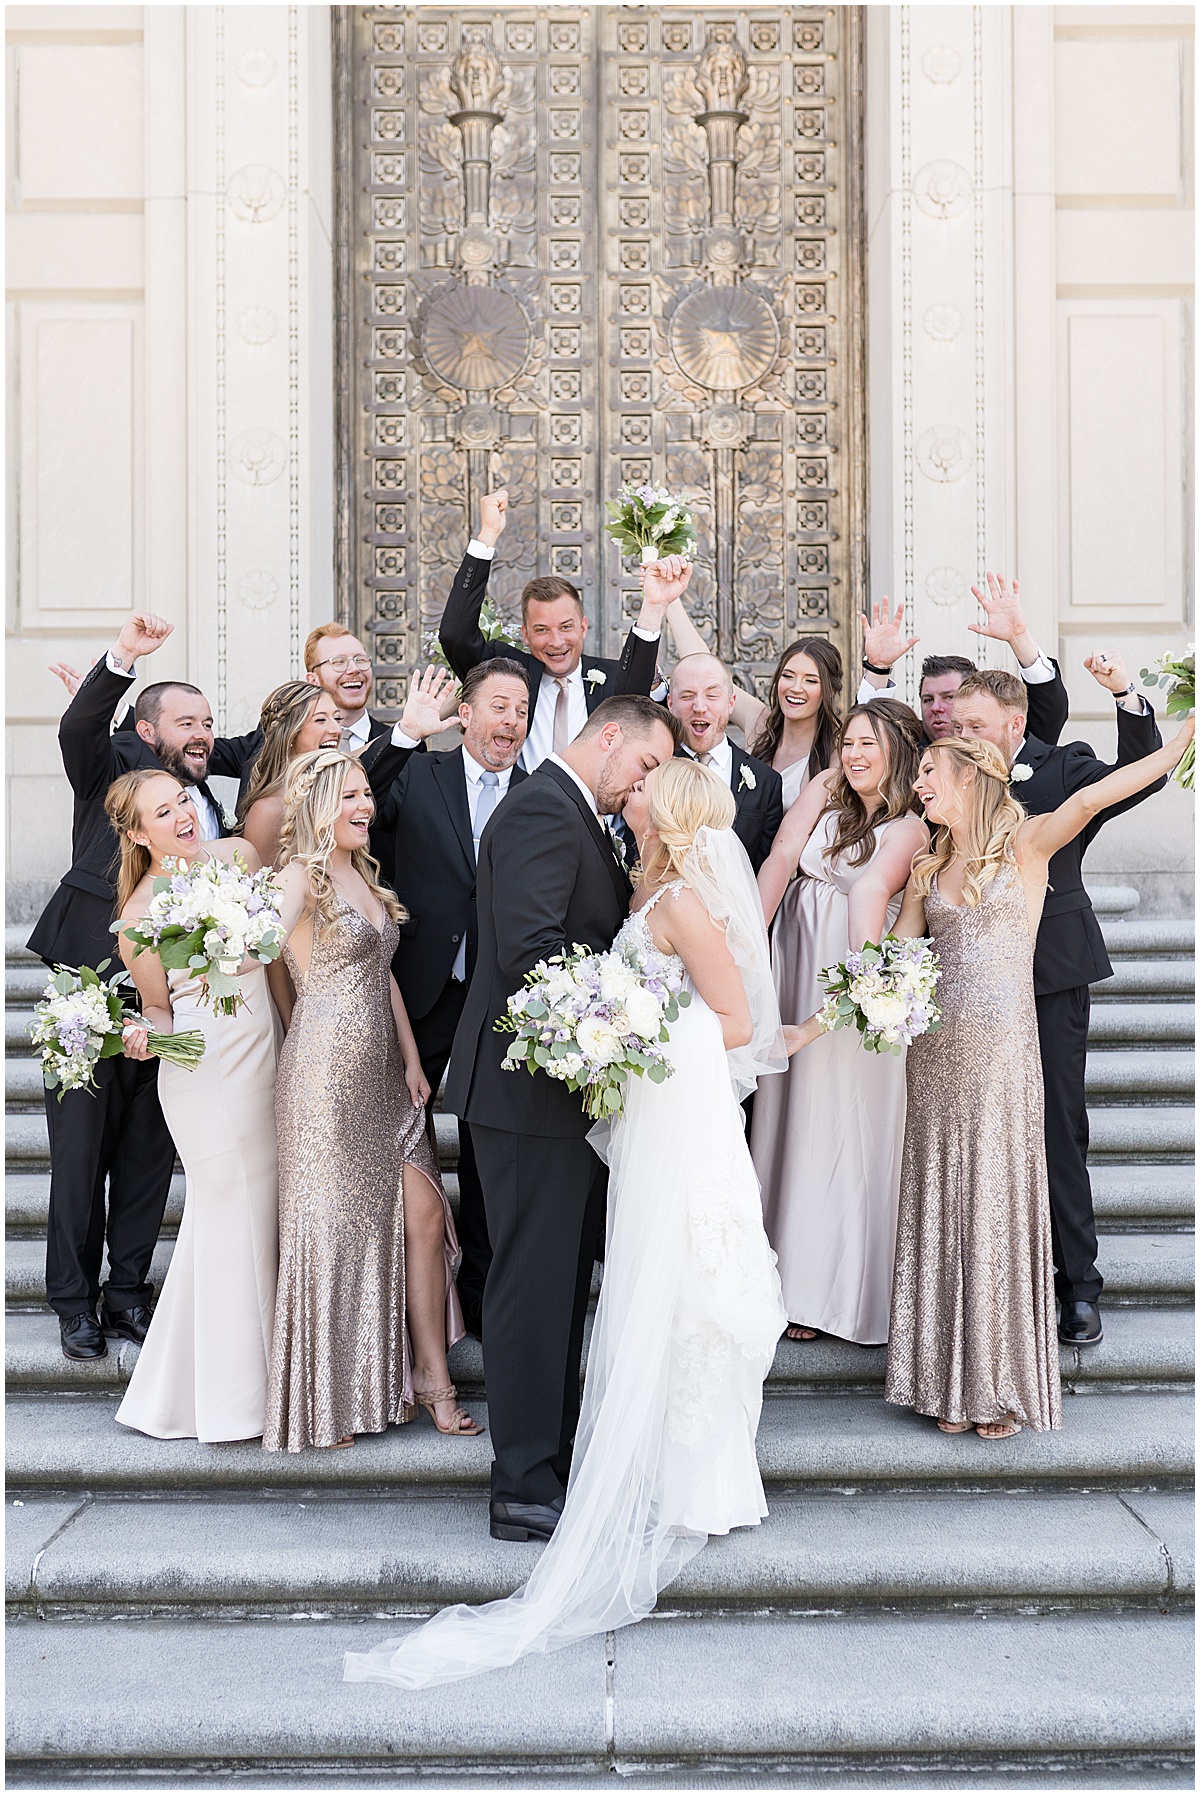 Bridal party celebrate at The Indiana War Memorial in downtown Indianapolis.